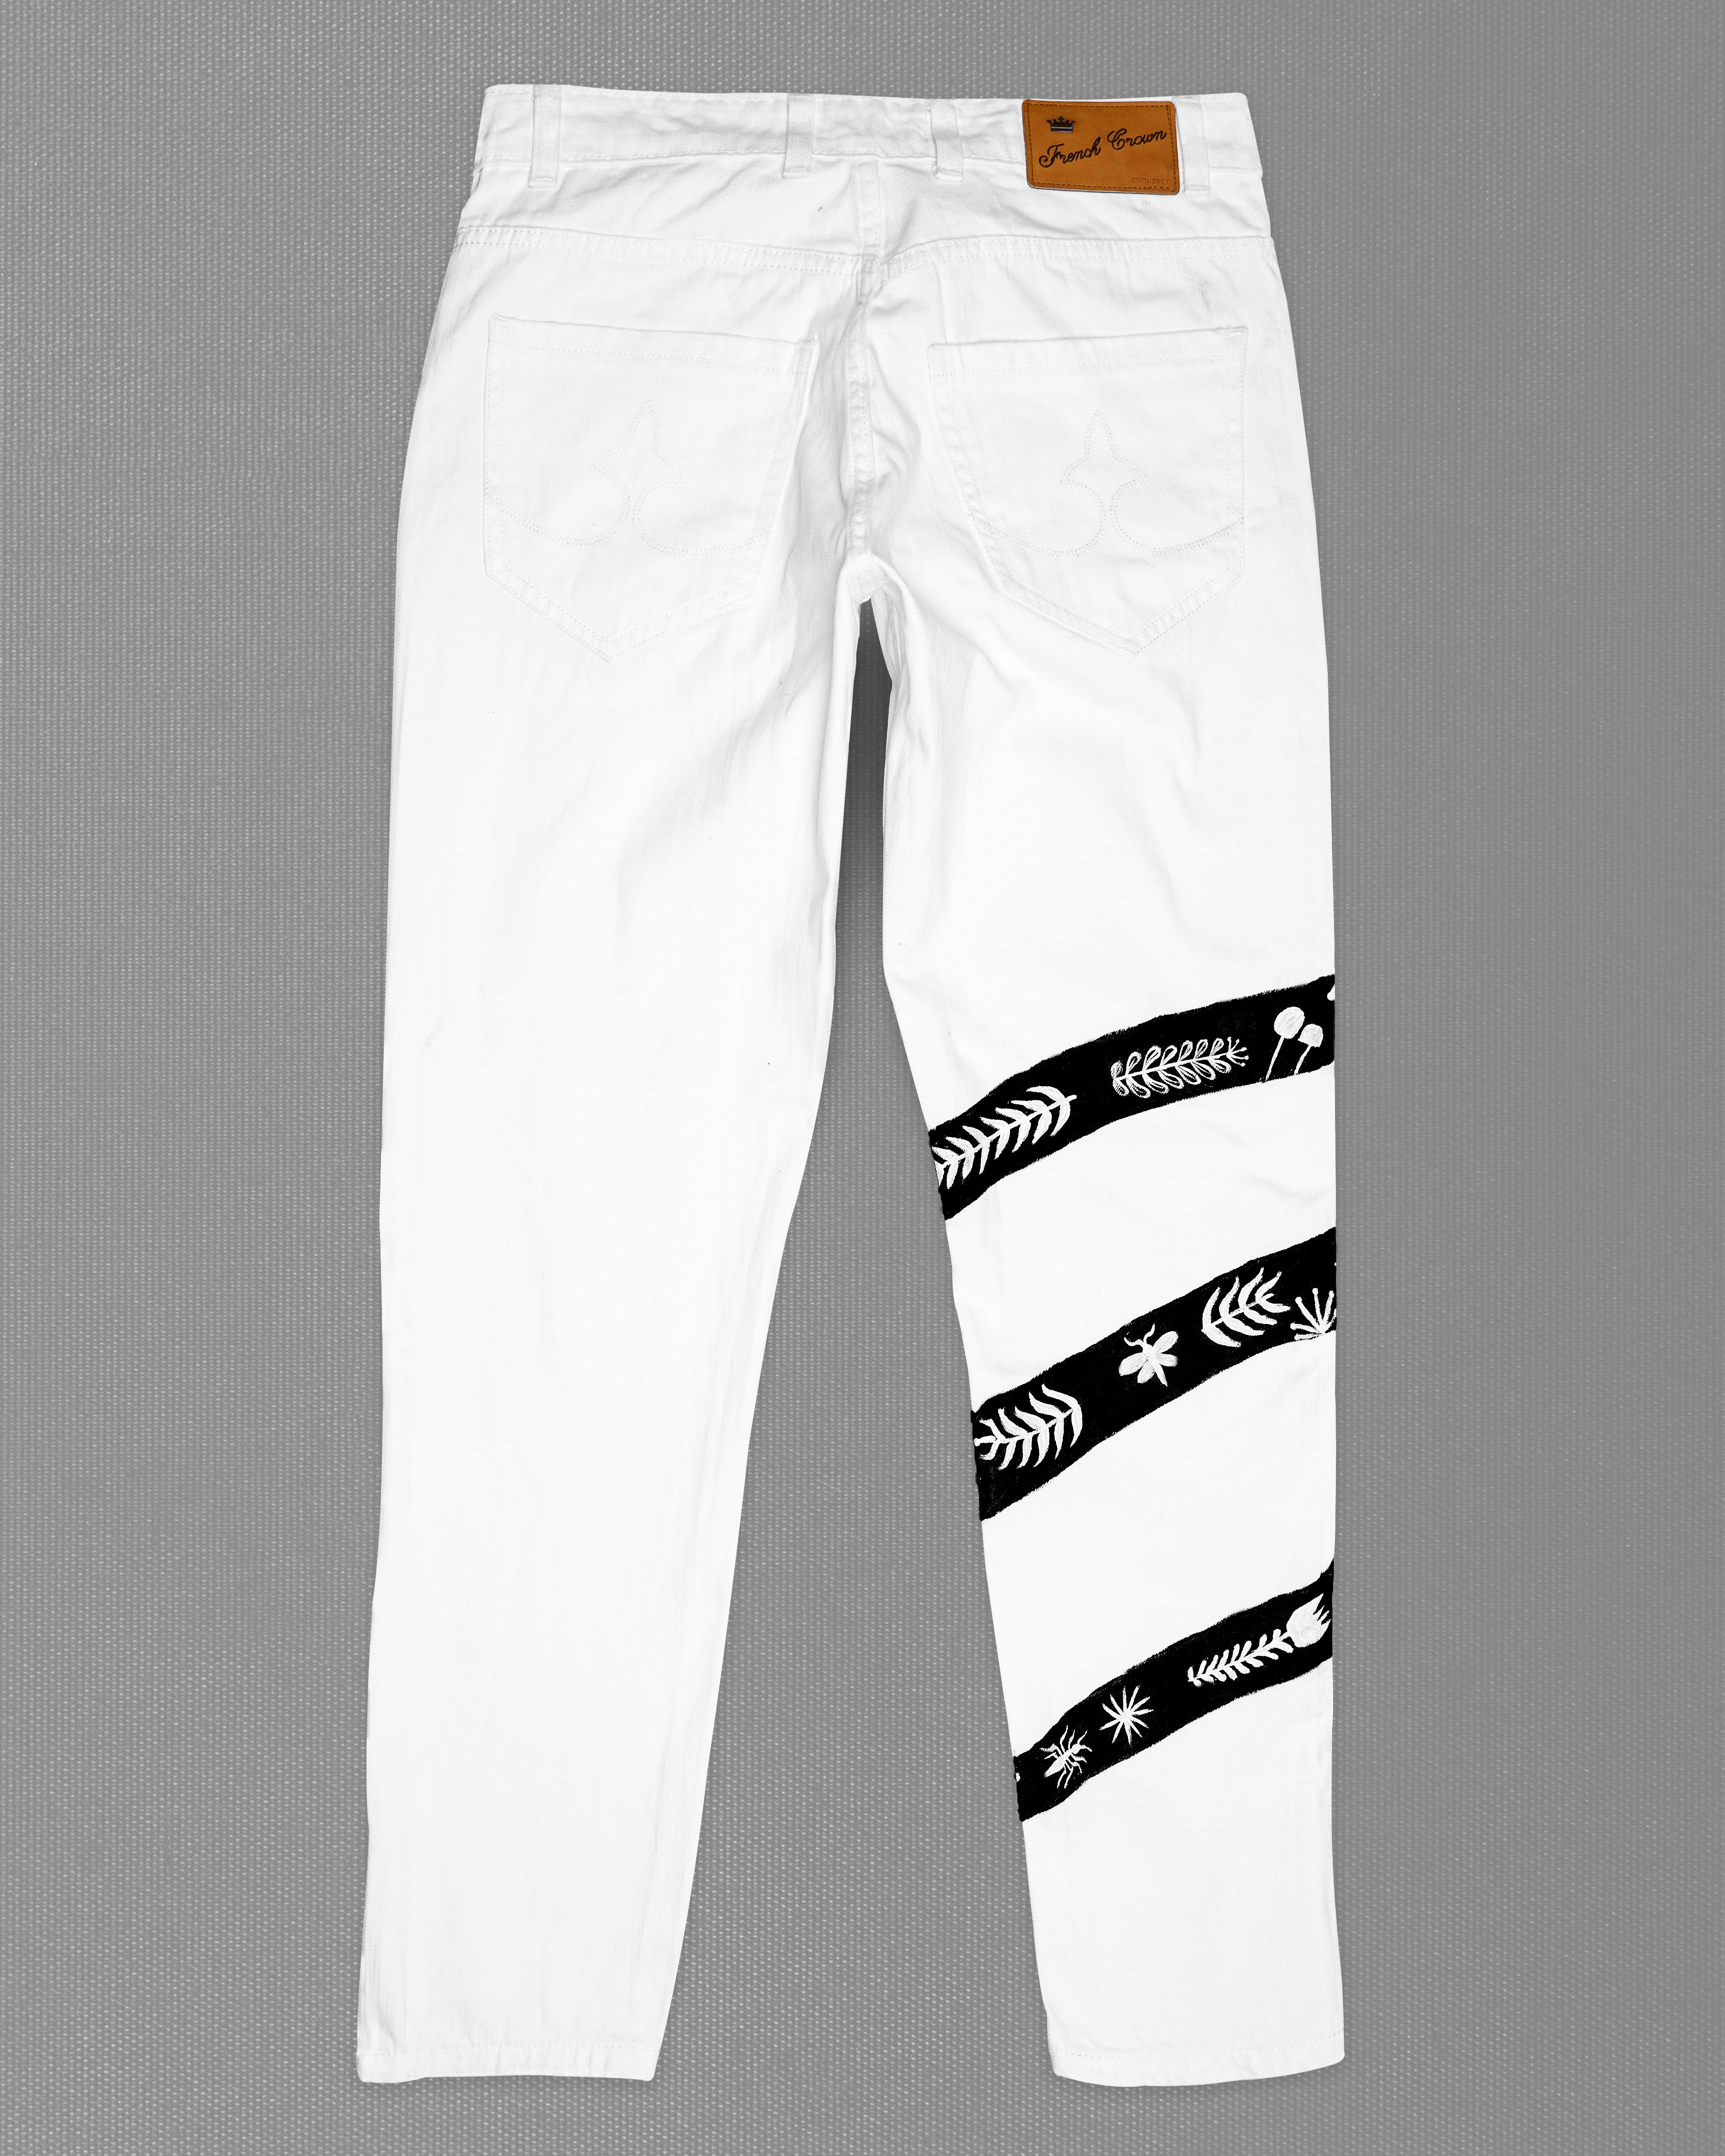 Bright White Rinse Wash Snake Hand Painted Denim J100-ART001-30, J100-ART001-32, J100-ART001-34, J100-ART001-36, J100-ART001-38, J100-ART001-40